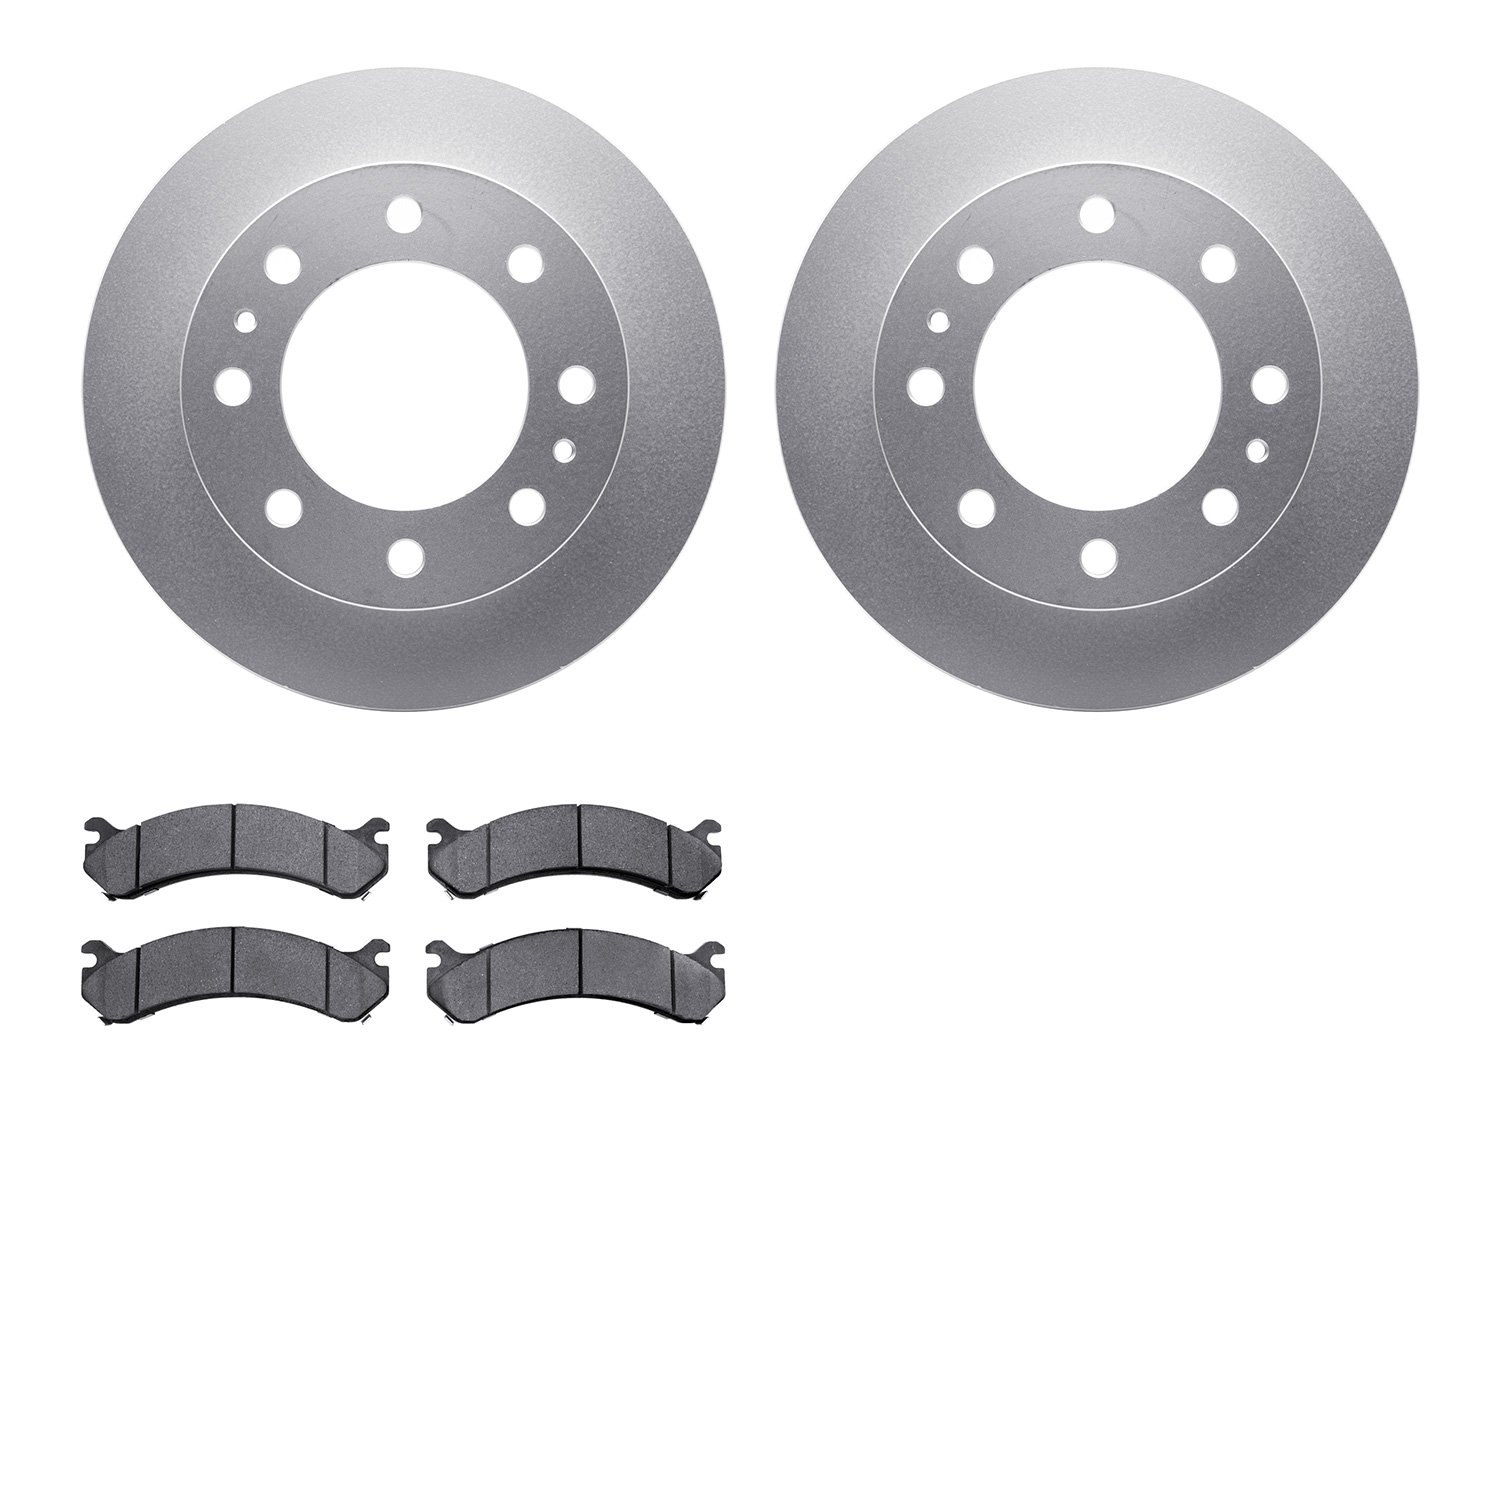 4402-48024 Geospec Brake Rotors with Ultimate-Duty Brake Pads Kit, 2001-2020 GM, Position: Front